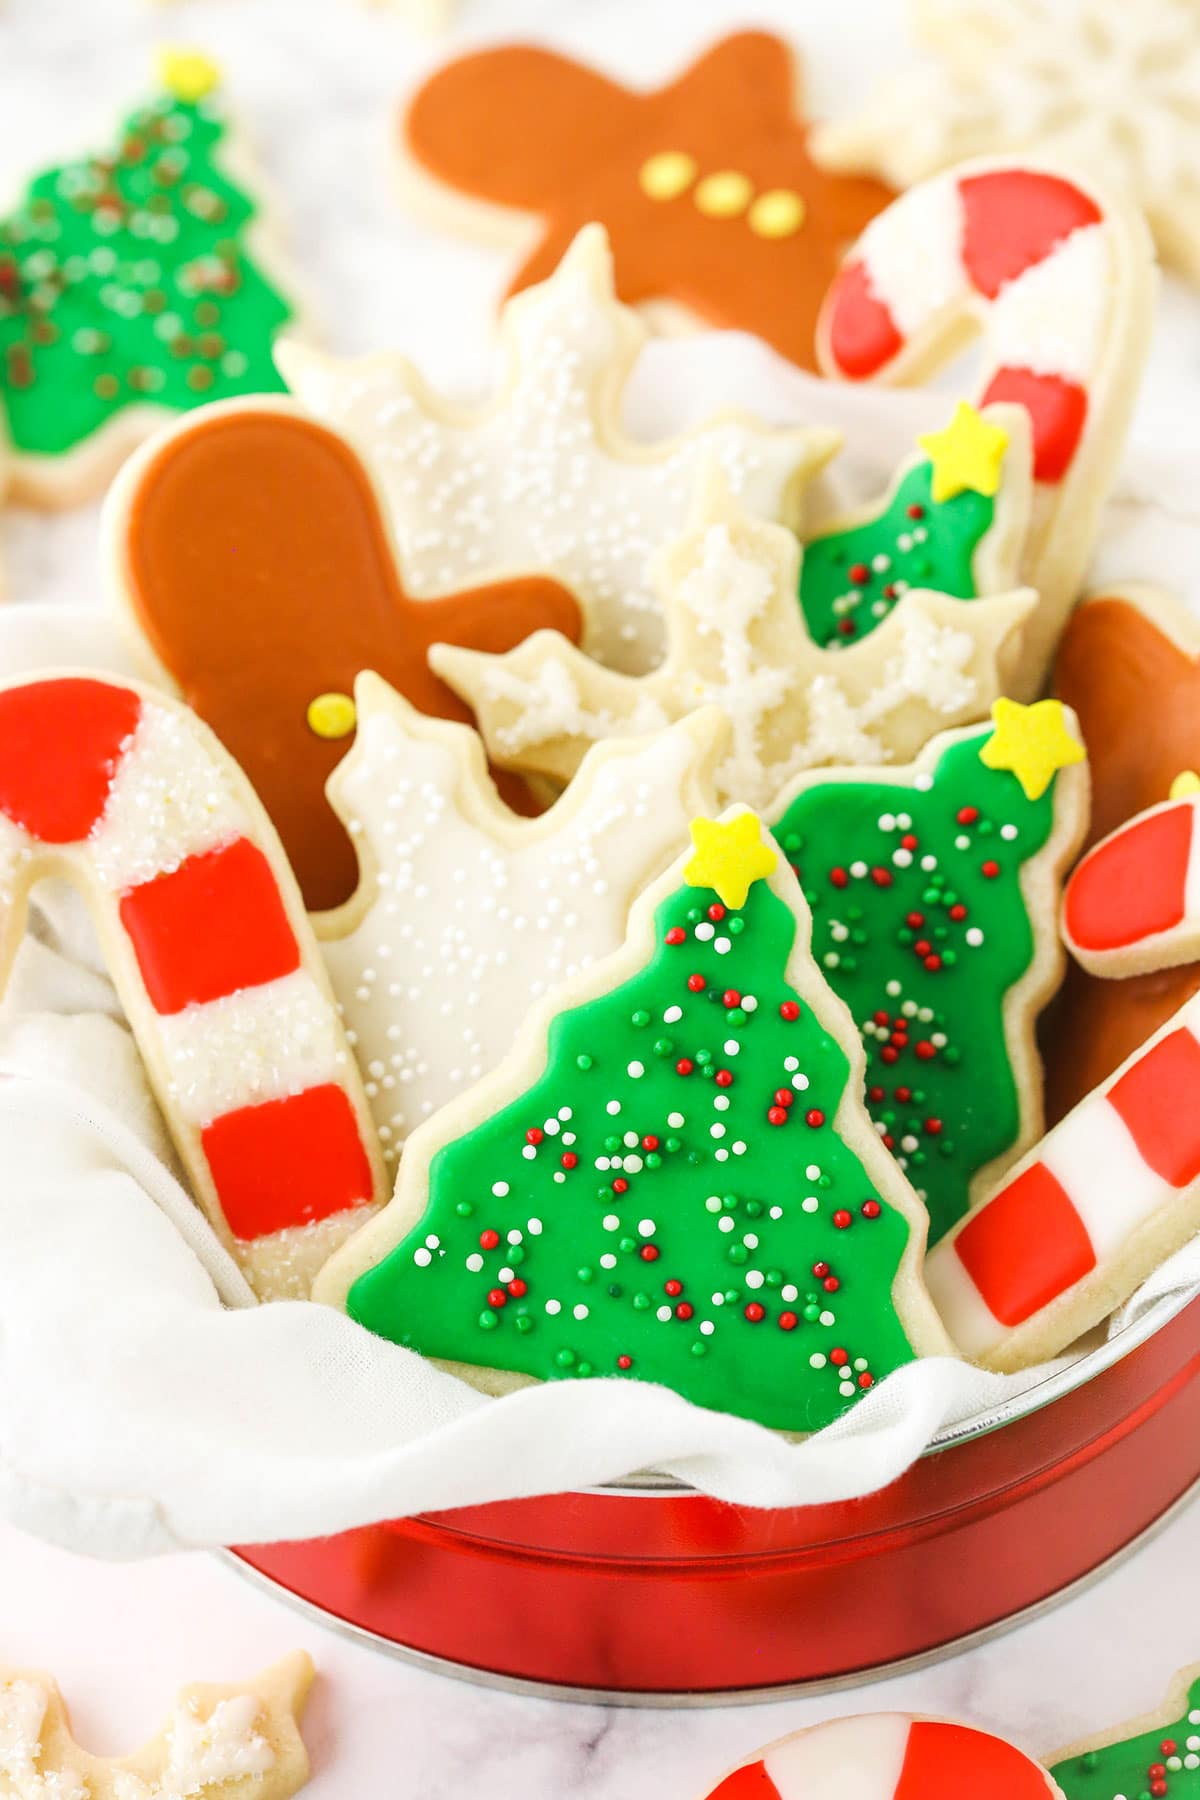 Sugar cookies shaped like snowflakes, candy canes and Christmas trees inside of a metal tin on a kitchen countertop